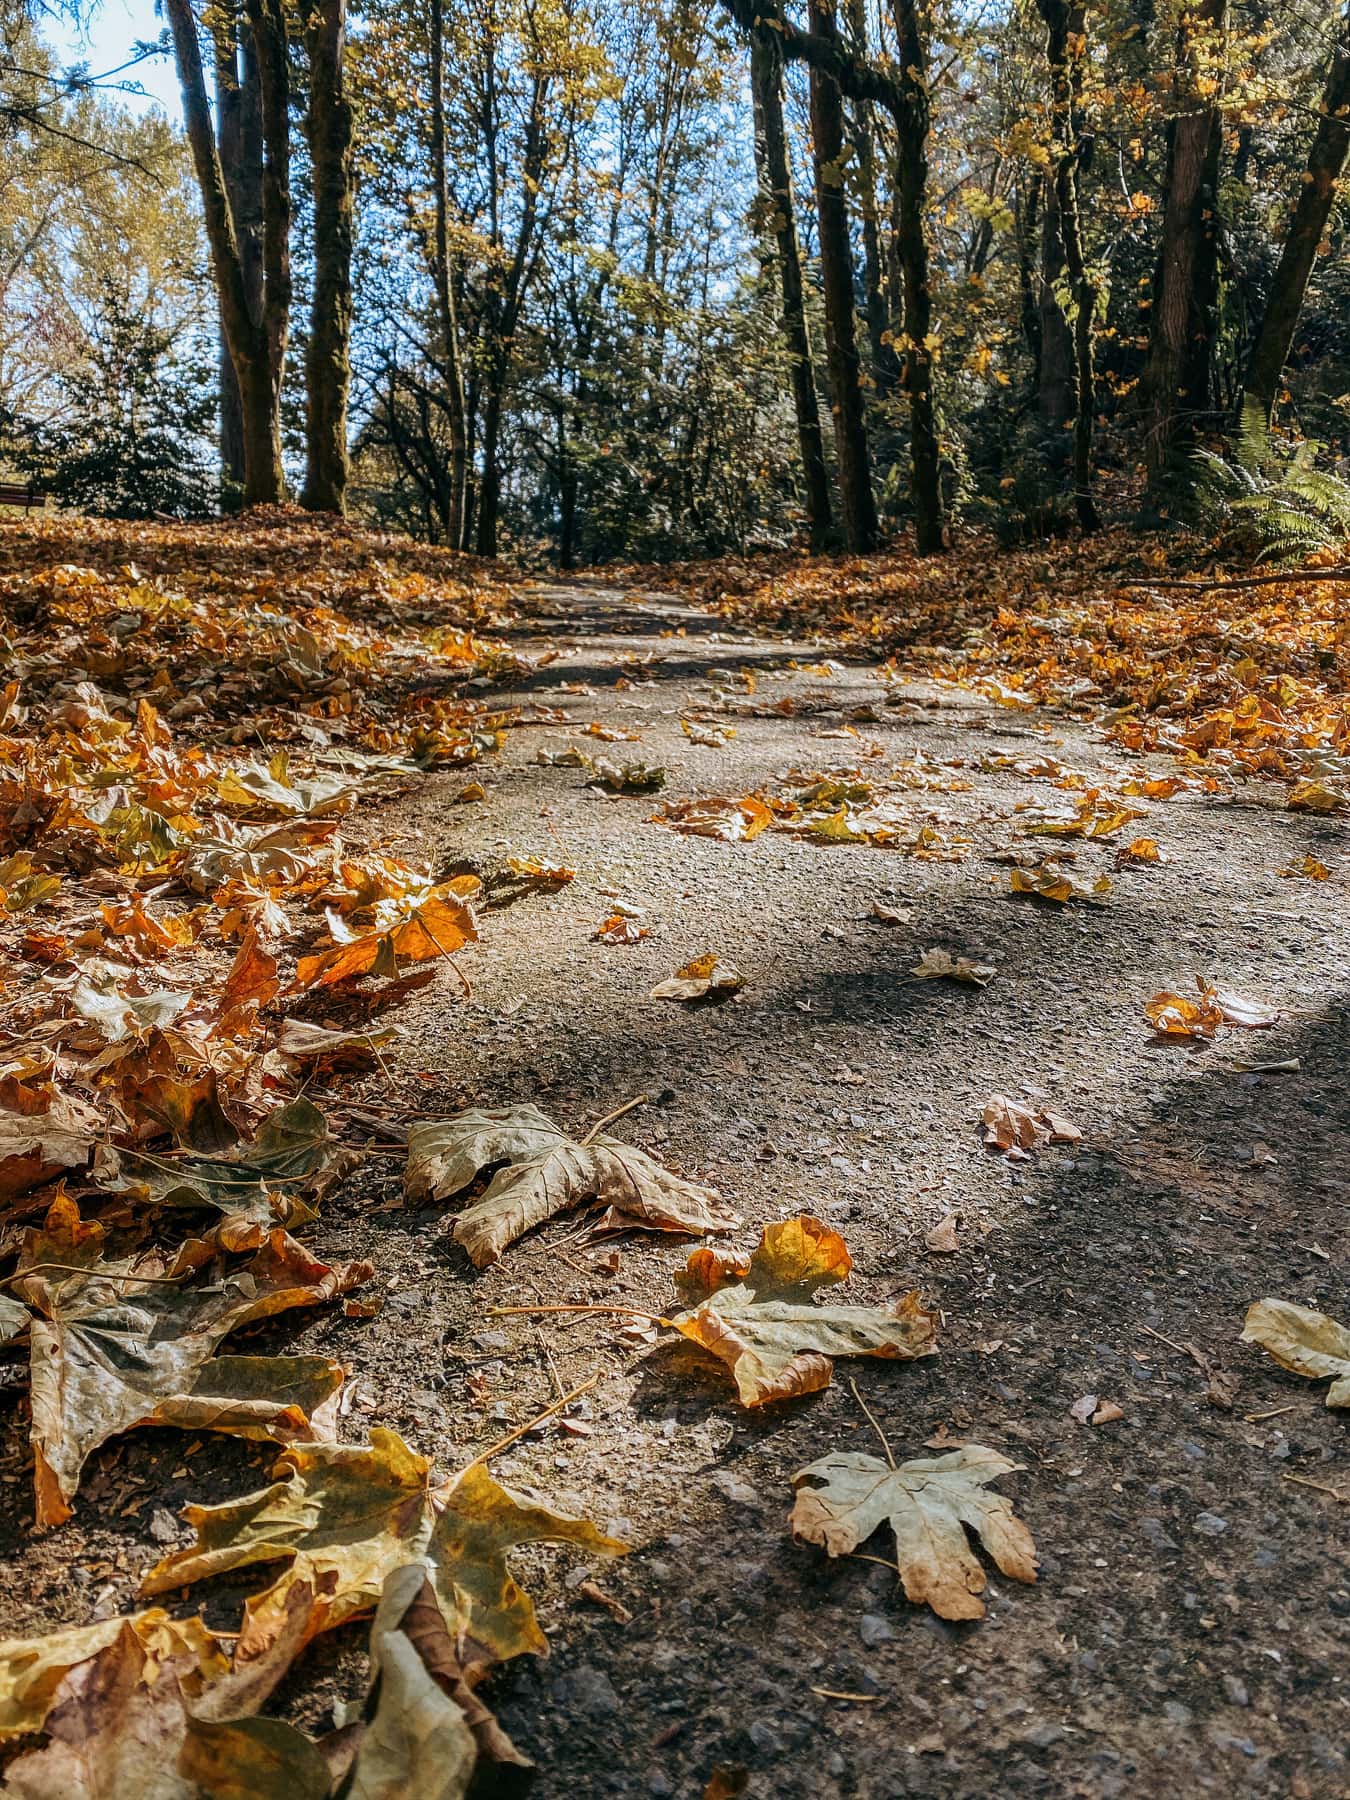 go on a nature hike in the fall